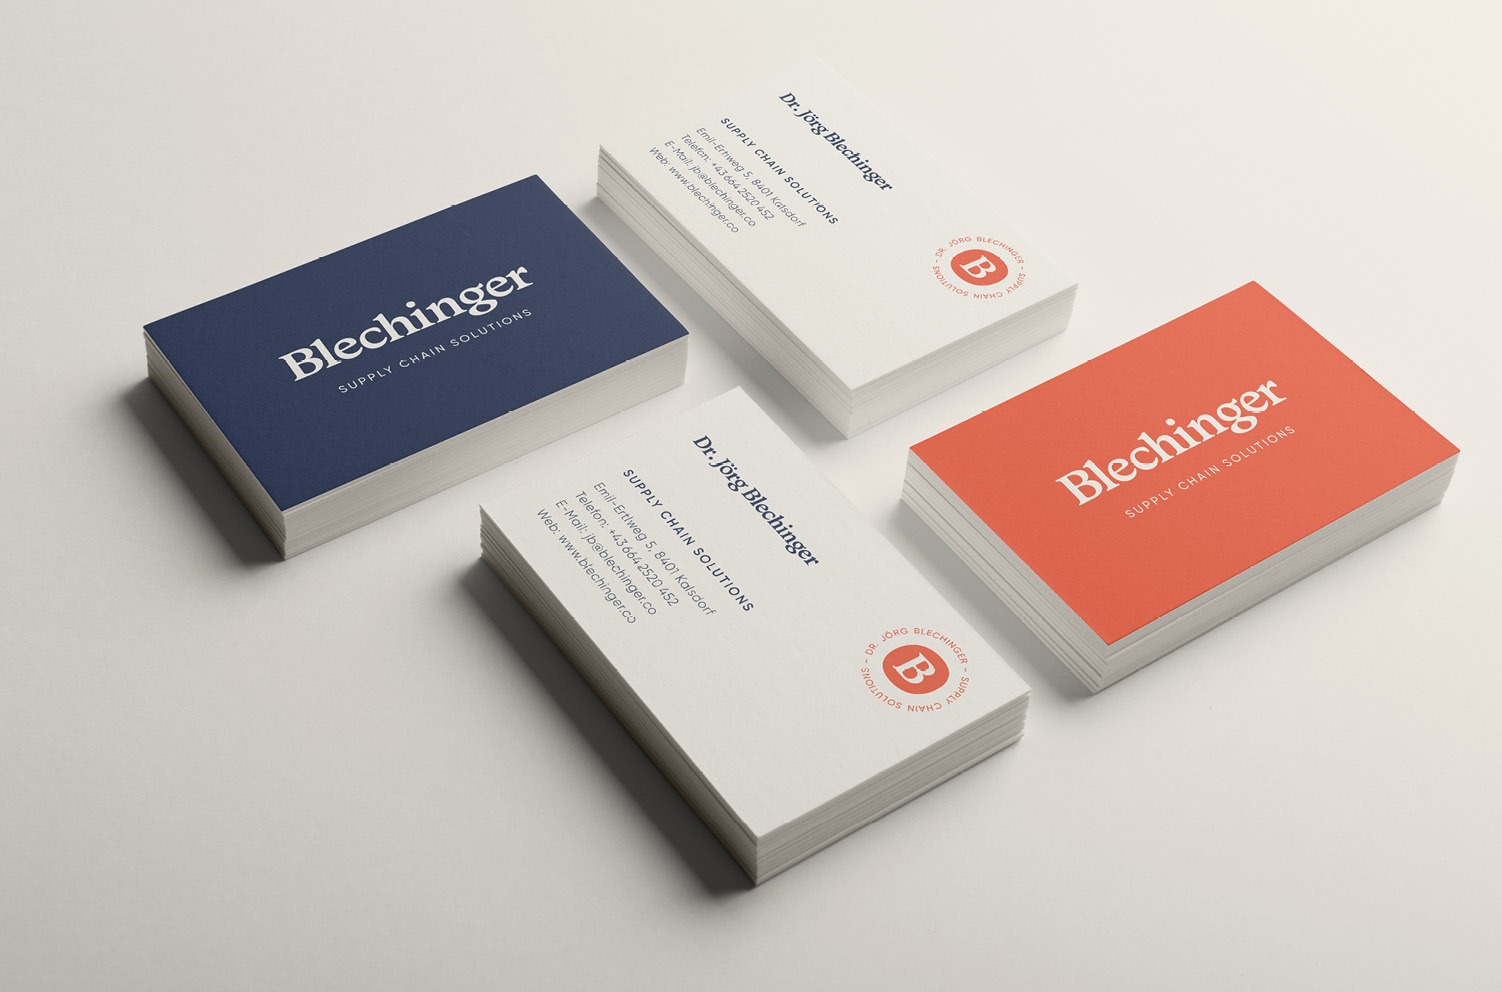 Three business cards with a blue, orange, and red design for Blechinger.